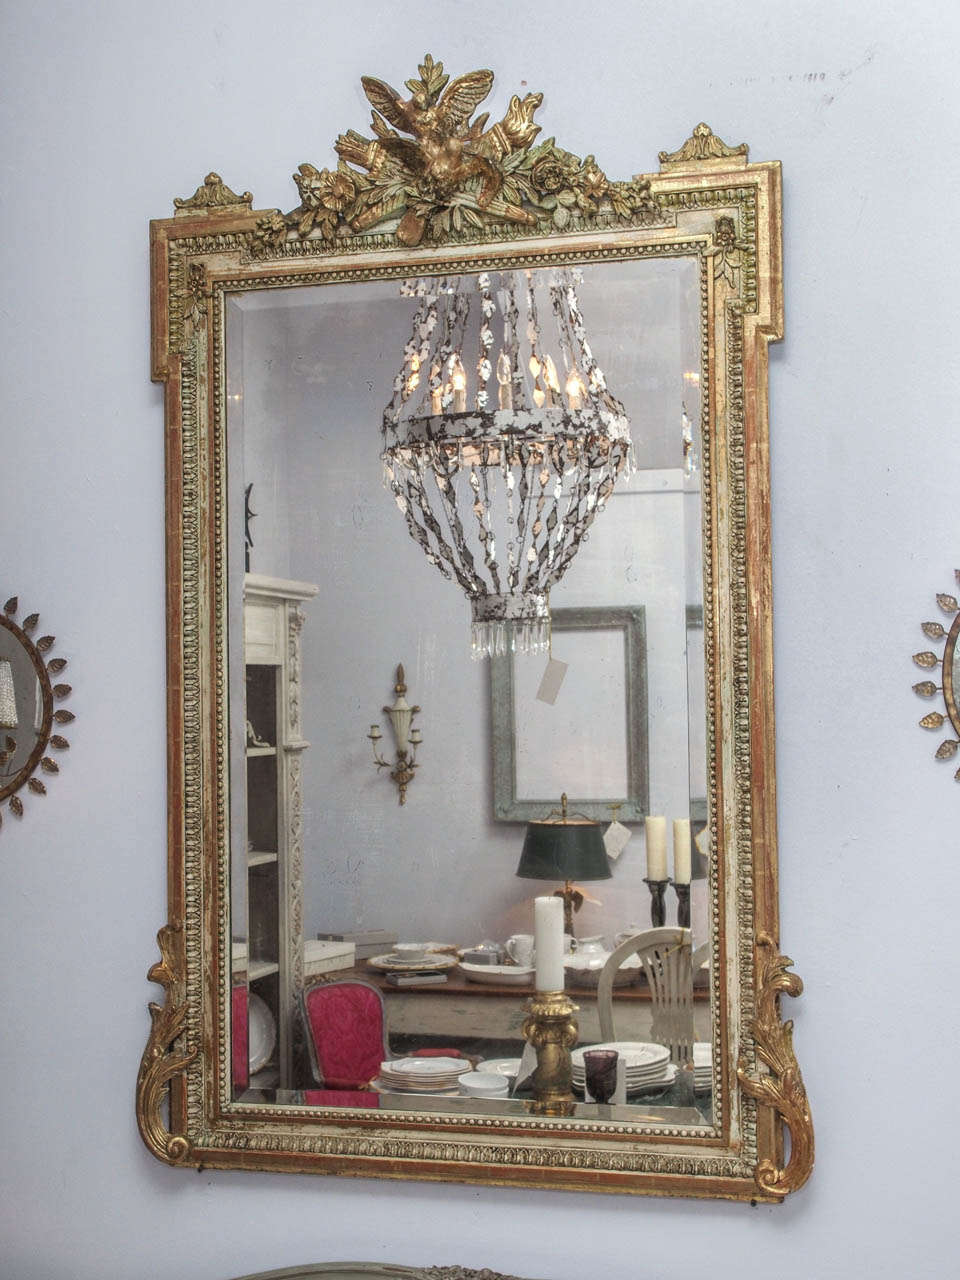 Handsome French C1890 richly carved wood, gesso, paint, and gilt mirror with Neo-classical details in the Louis XVI style. A beaded edge borders the beveled mirror, which is housed in a frame surmounted with a quiver,torch, bird and floral motif.